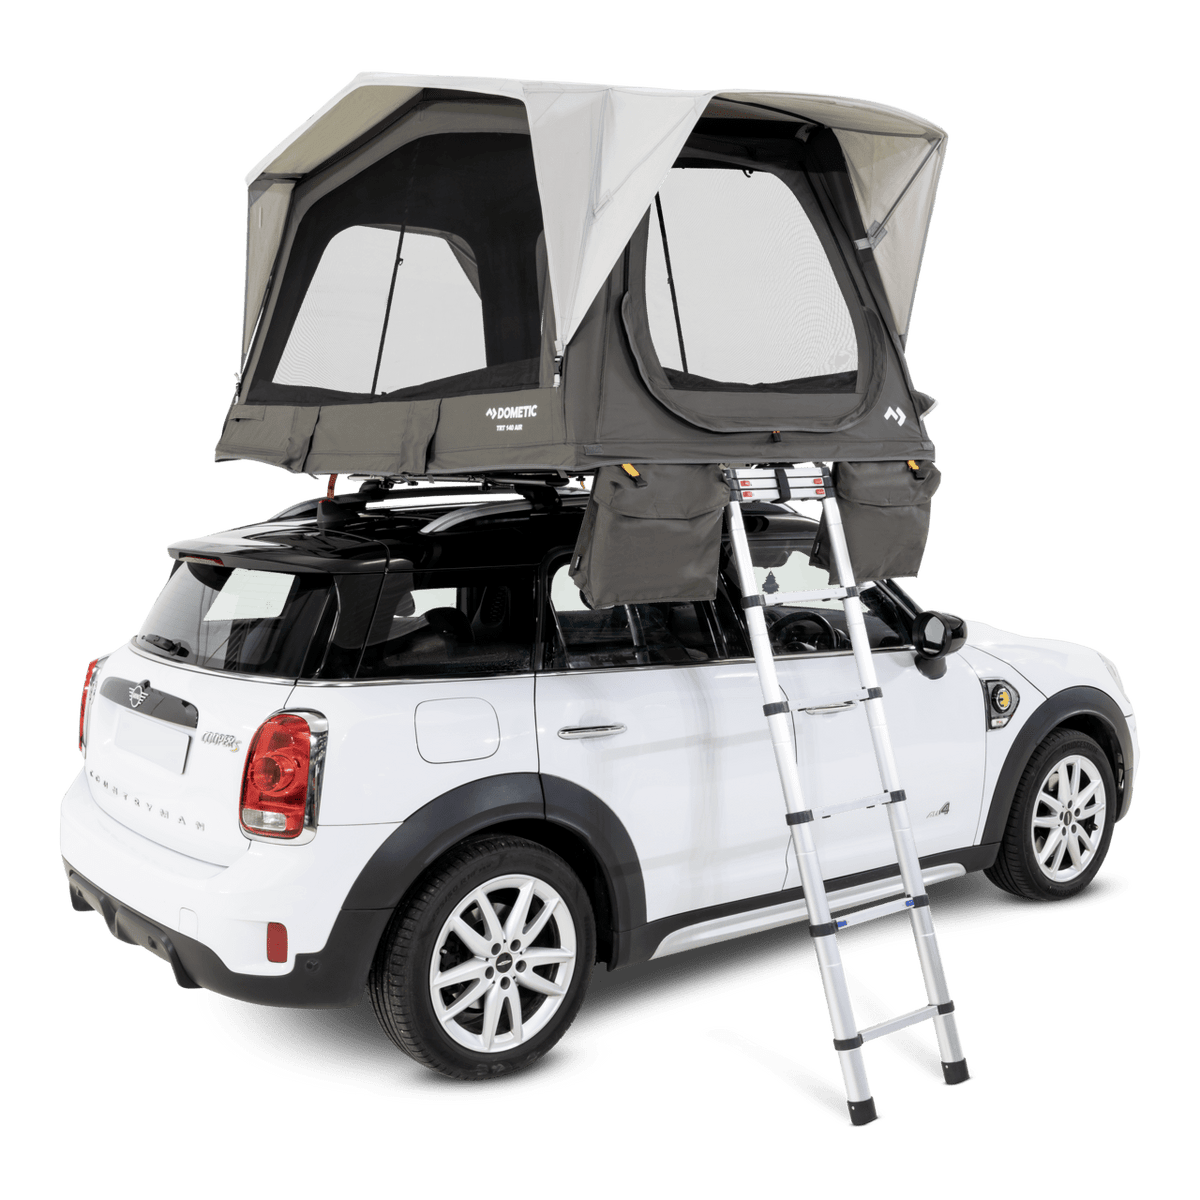 Dometic TRT 140 Air Rooftop Tent - 9120002265